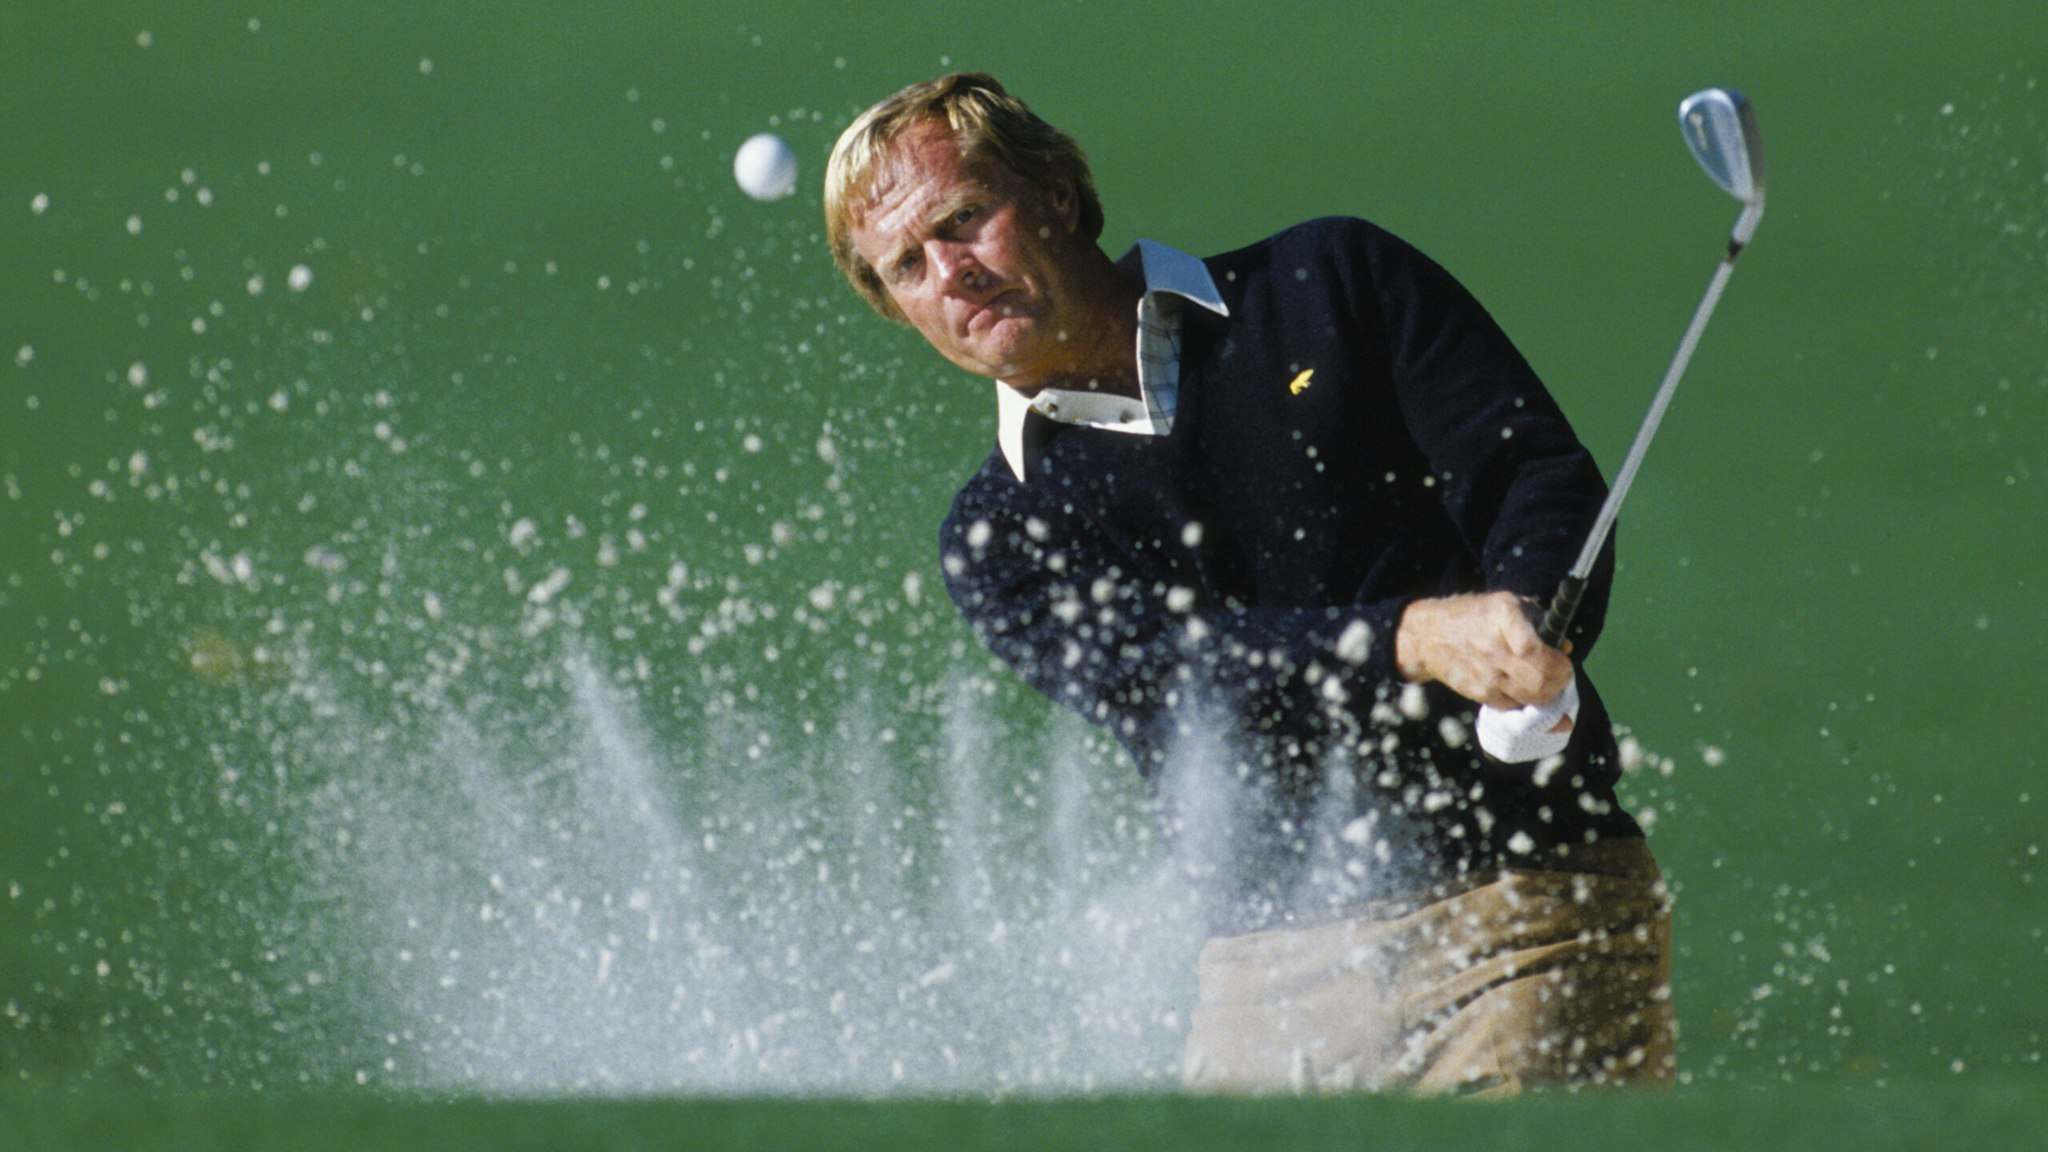 Jack Nicklaus of the USA keeps his eye on the ball as he hits out of the bunker with the sand creating a crown effect during the US Masters Golf Tournament on 12th April 1986 at the Augusta National Golf Club in Augusta, Georgia, USA. Visions of Sports.